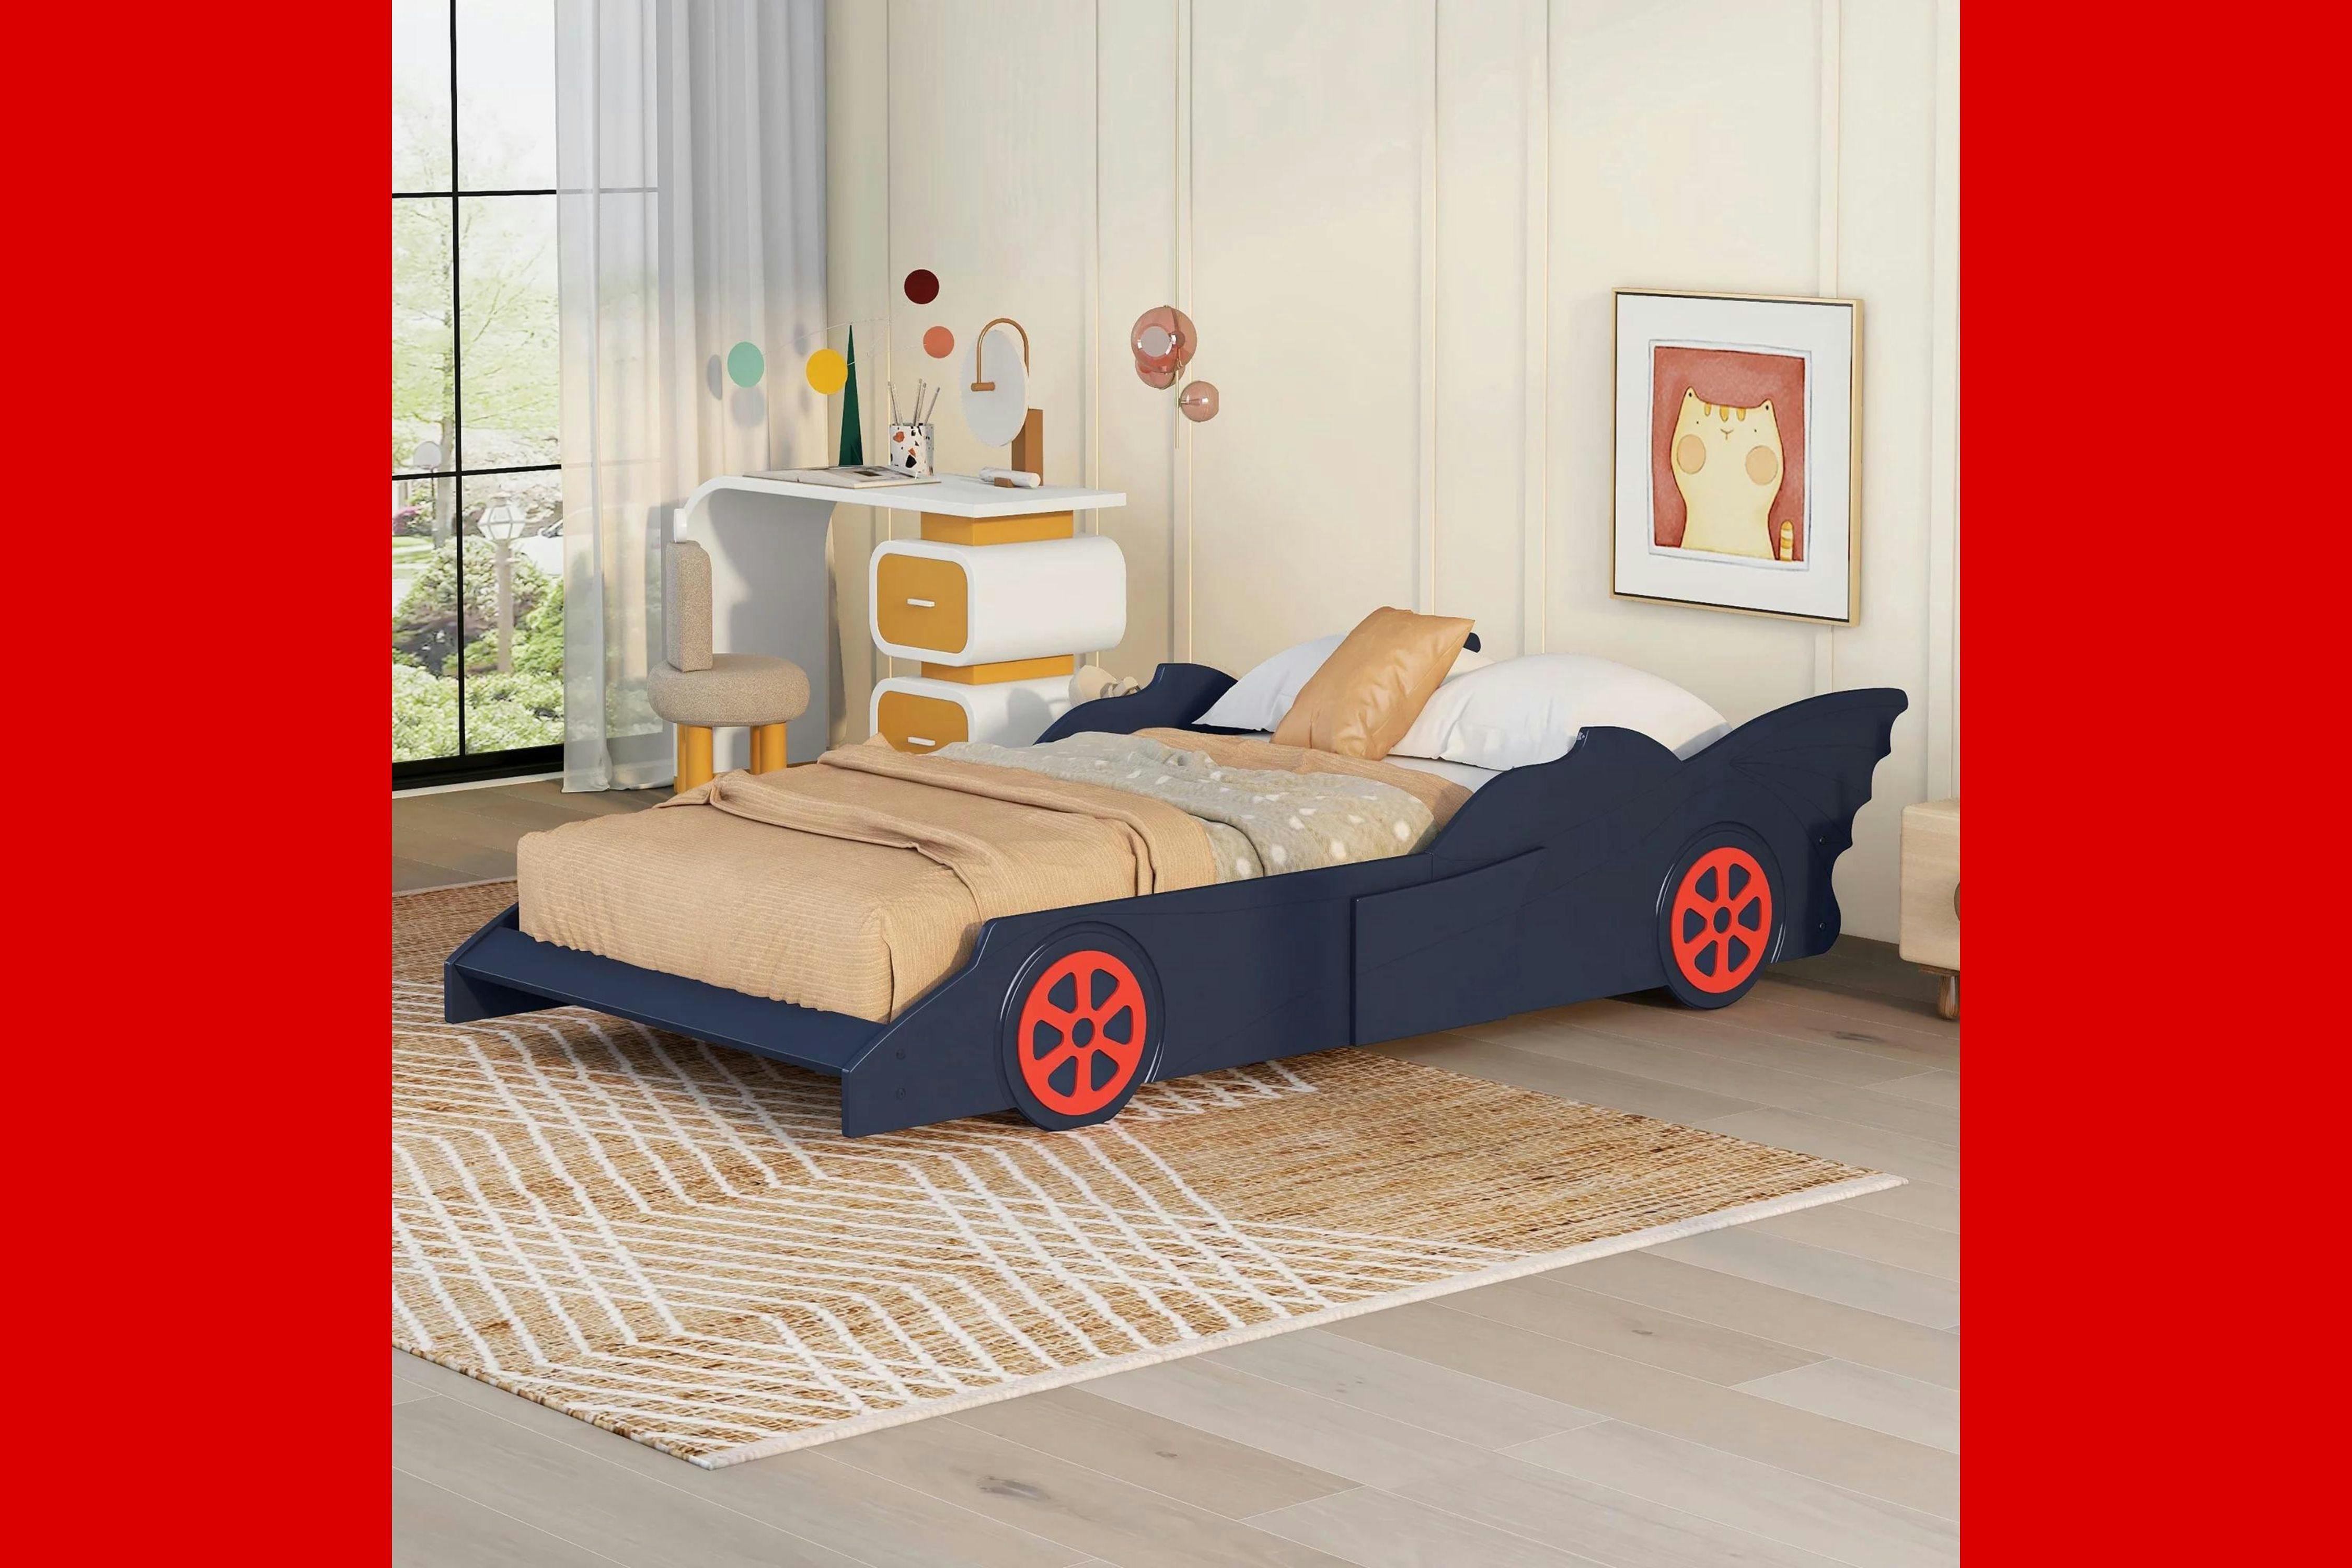 This Wood Race Car Bed Is Only $134 at Walmart (Save 33%) - The Krazy ...